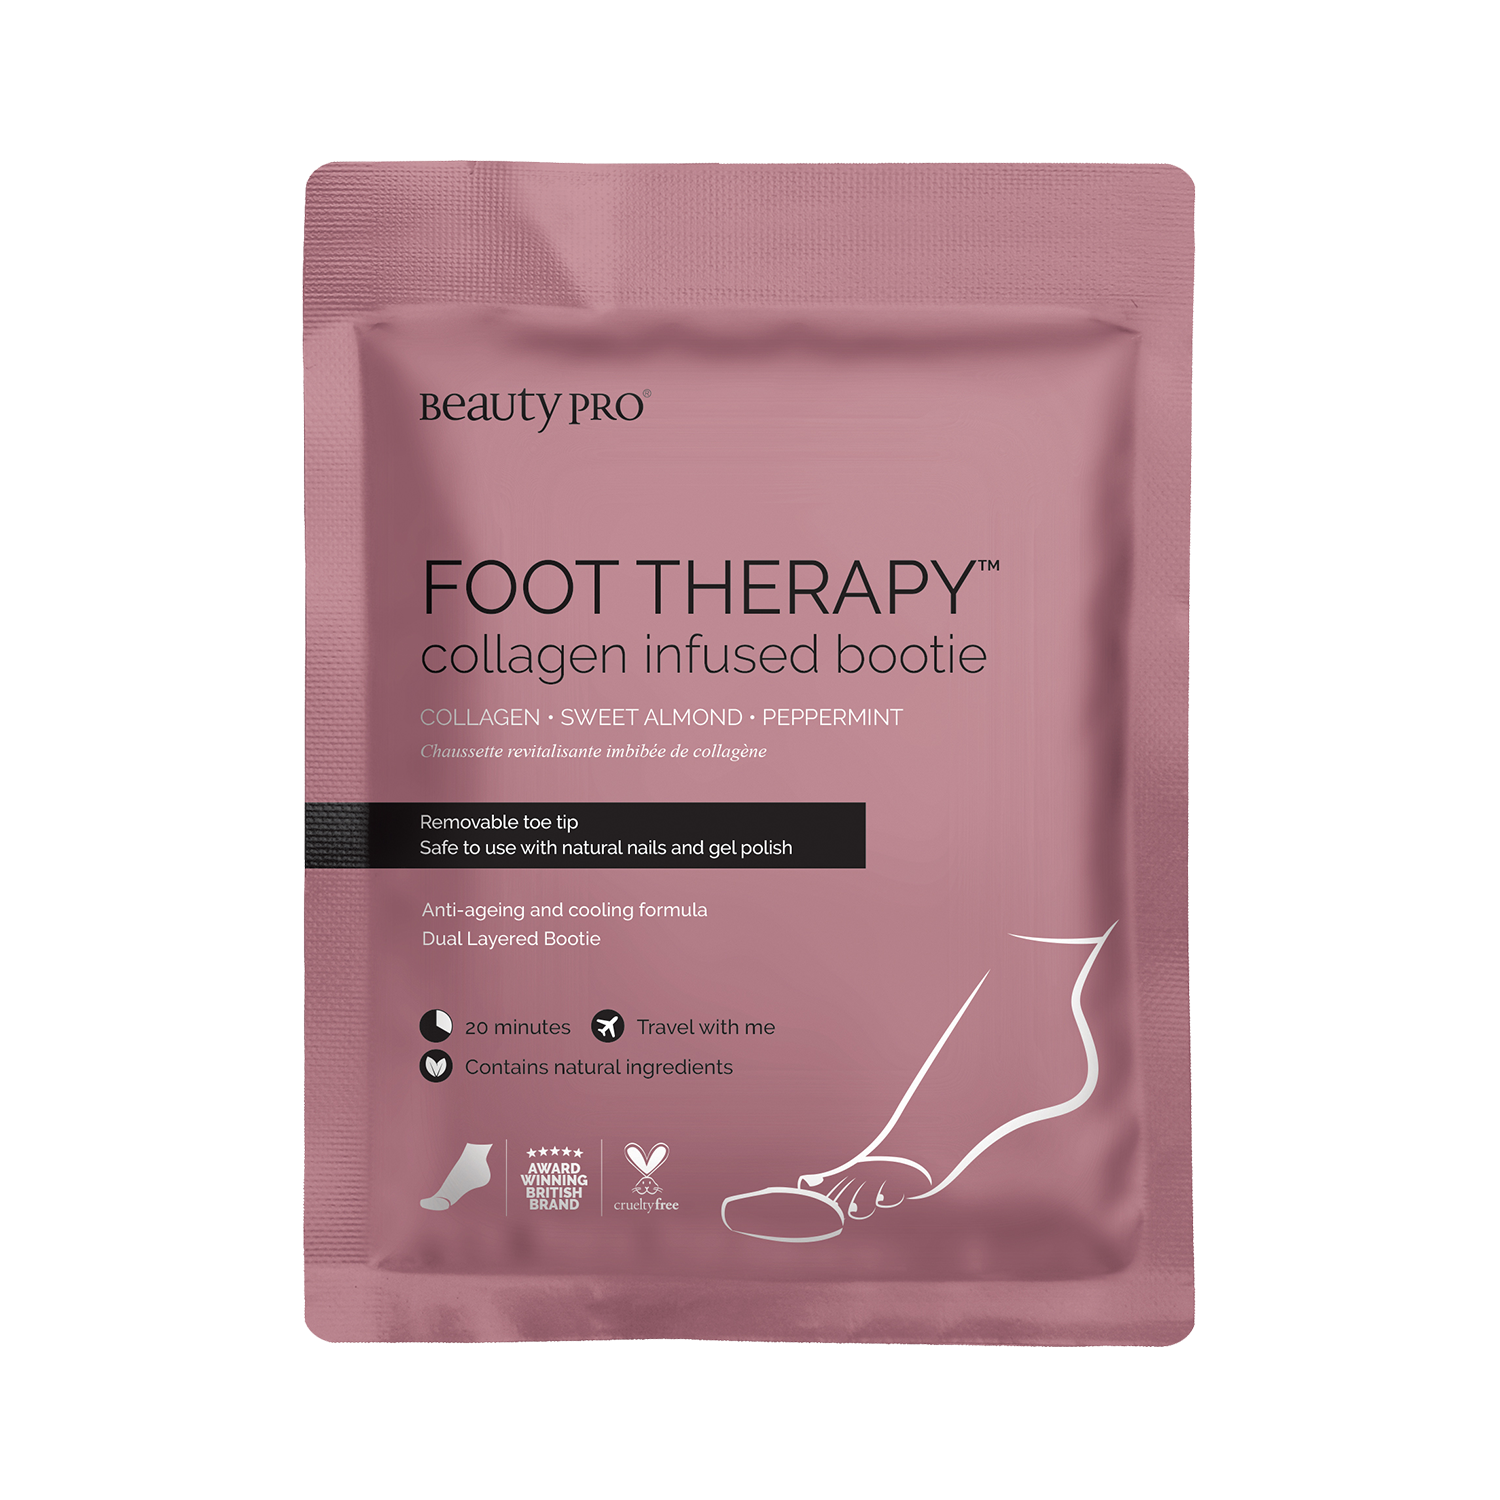 BeautyPro FOOT THERAPY Collagen Infused Bootie with Removable Toe Tip BeautyPro FOOT THERAPY Collagen Infused Bootie with Removable Toe Tip 1